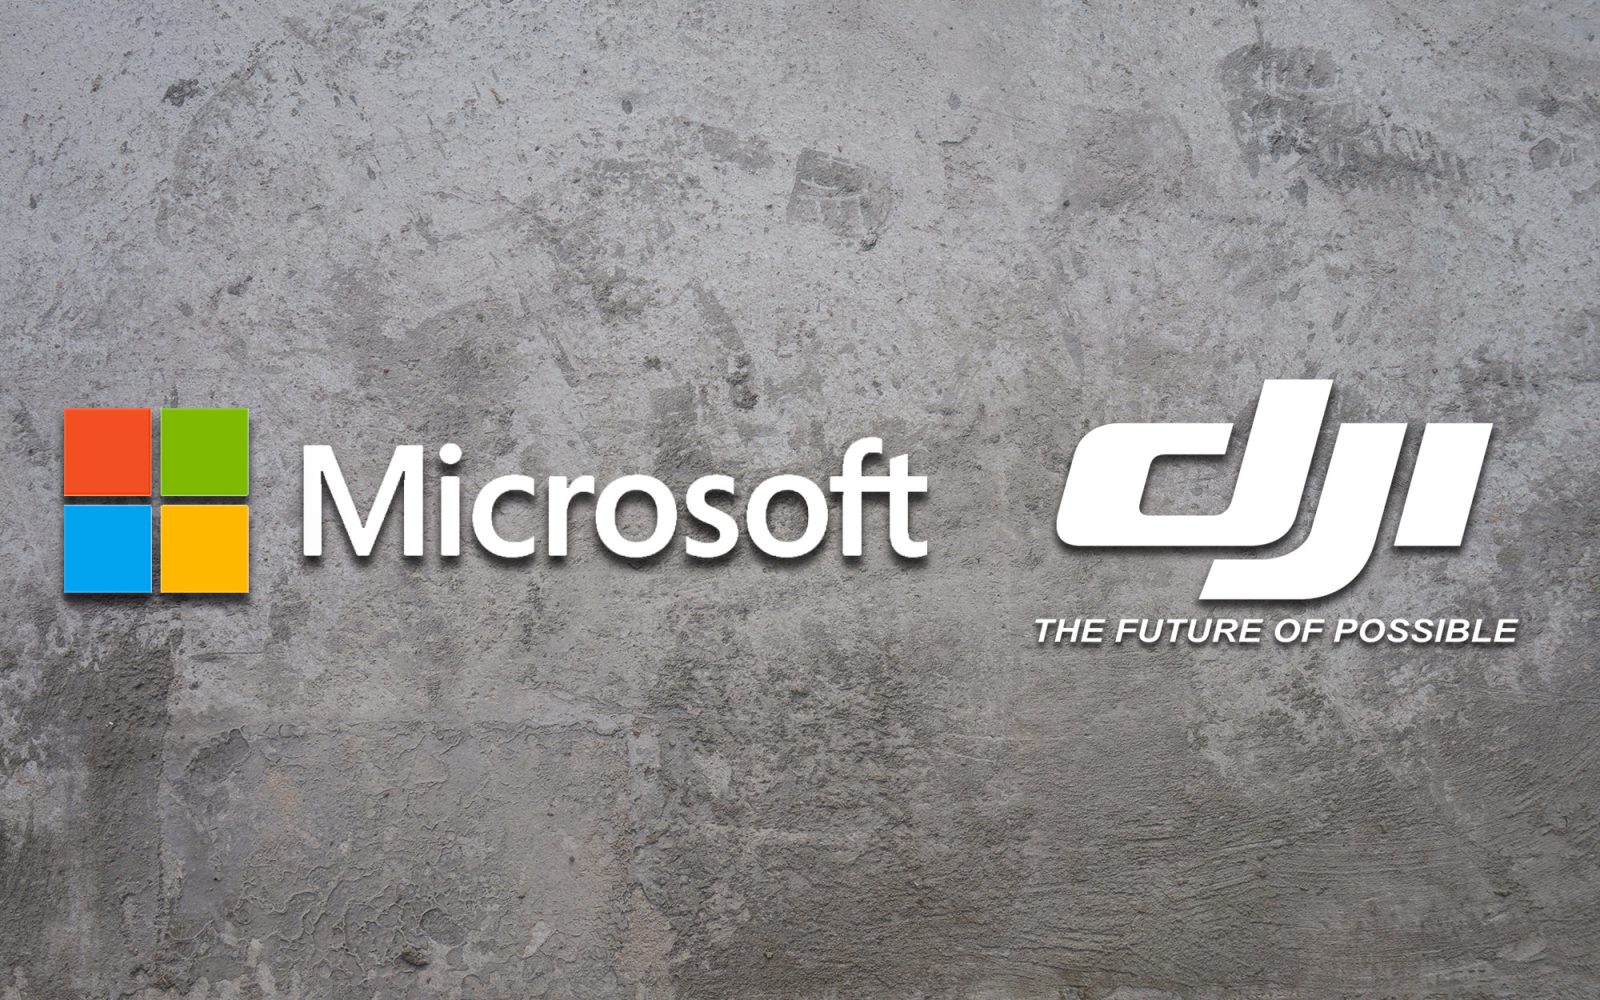 DJI and Microsoft are working together to create a new Windows 10 drone SDK